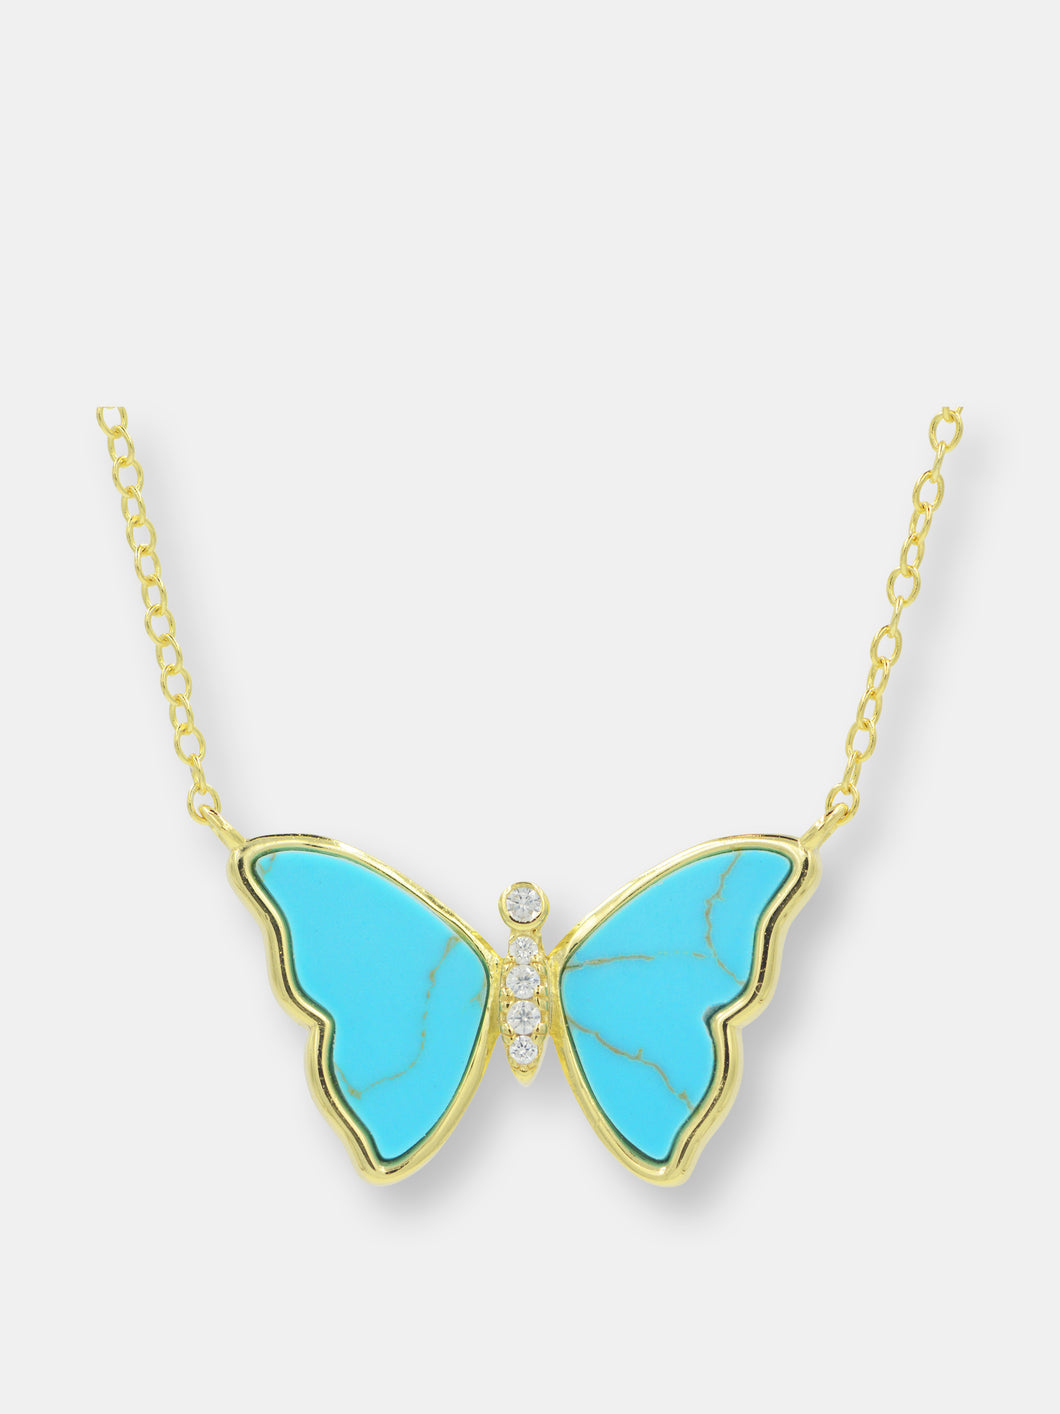 Turquoise Butterfly Necklace With Bezel